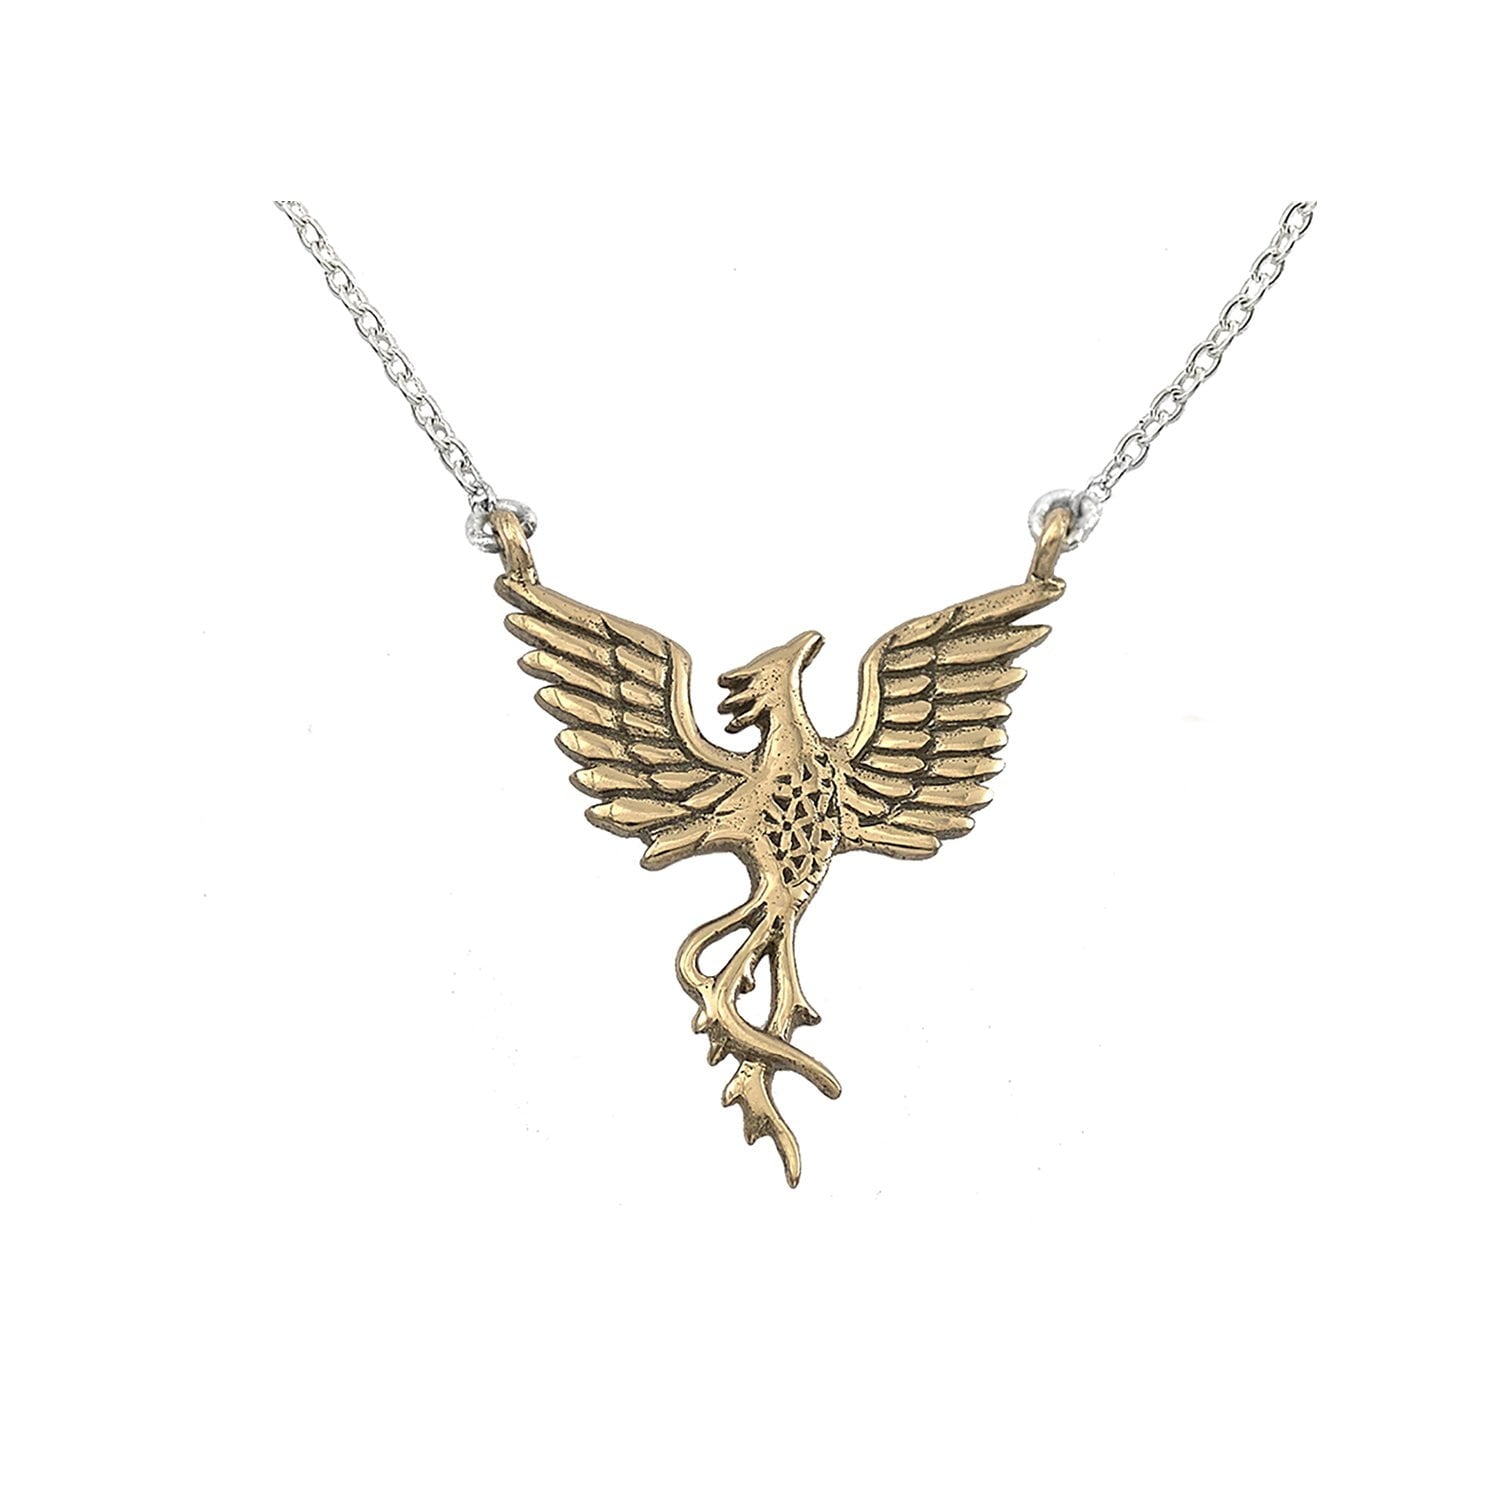 Jewelry Evolution Necklace Bronze on Sterling Silver Chain Phoenix "Rise Strong" Petite Necklace